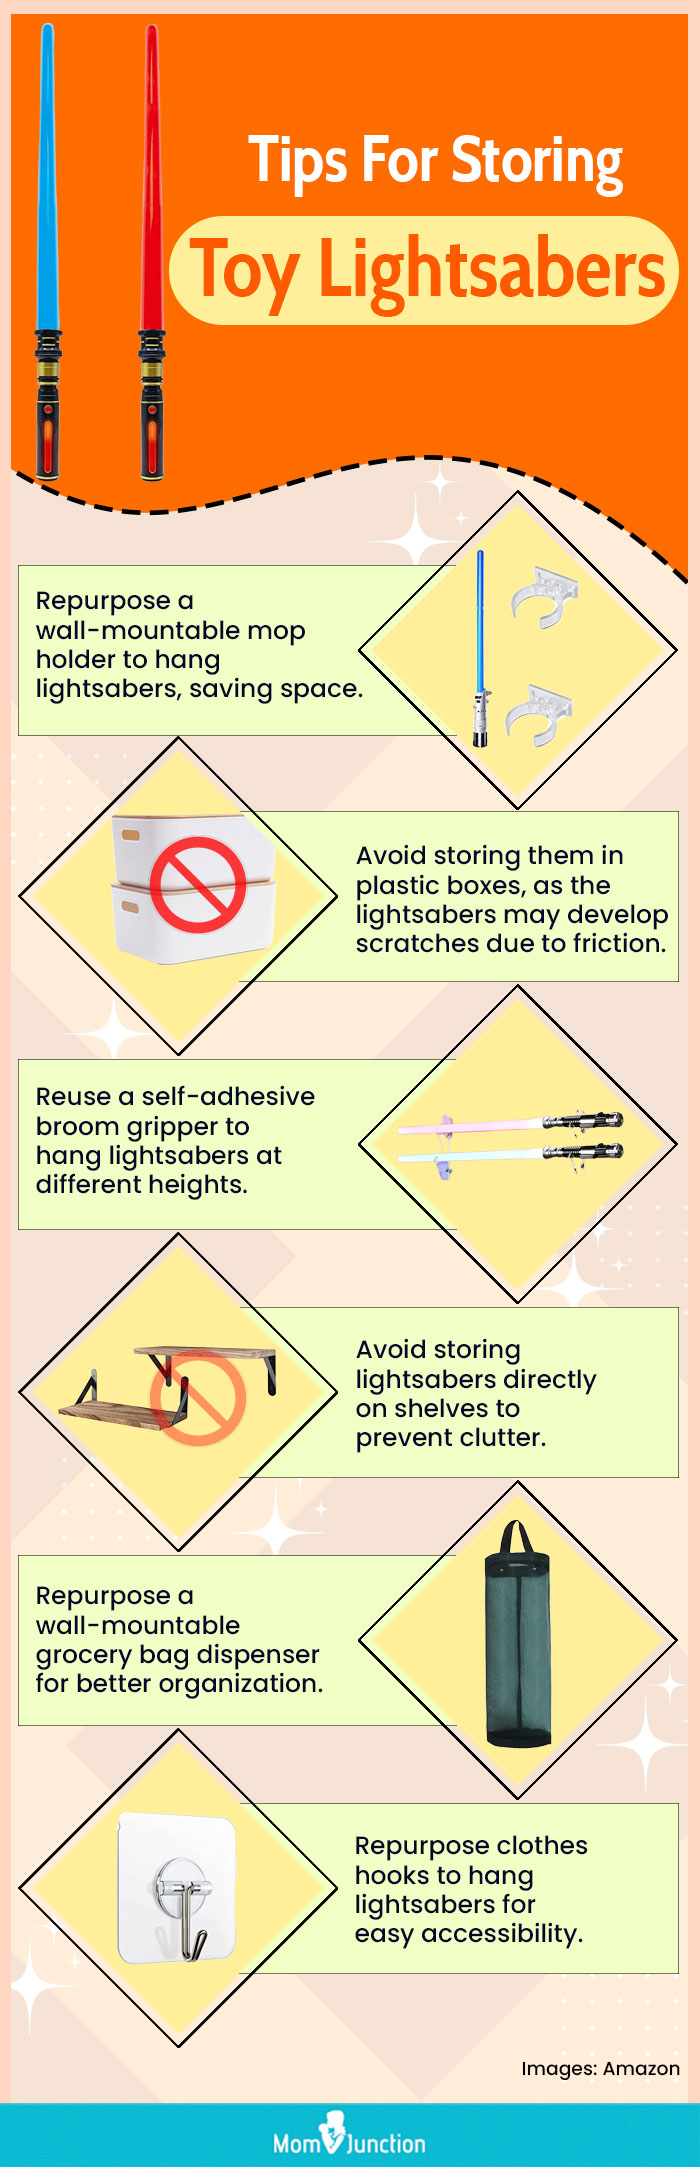 Tips For Storing Toy Lightsabers (infographic)